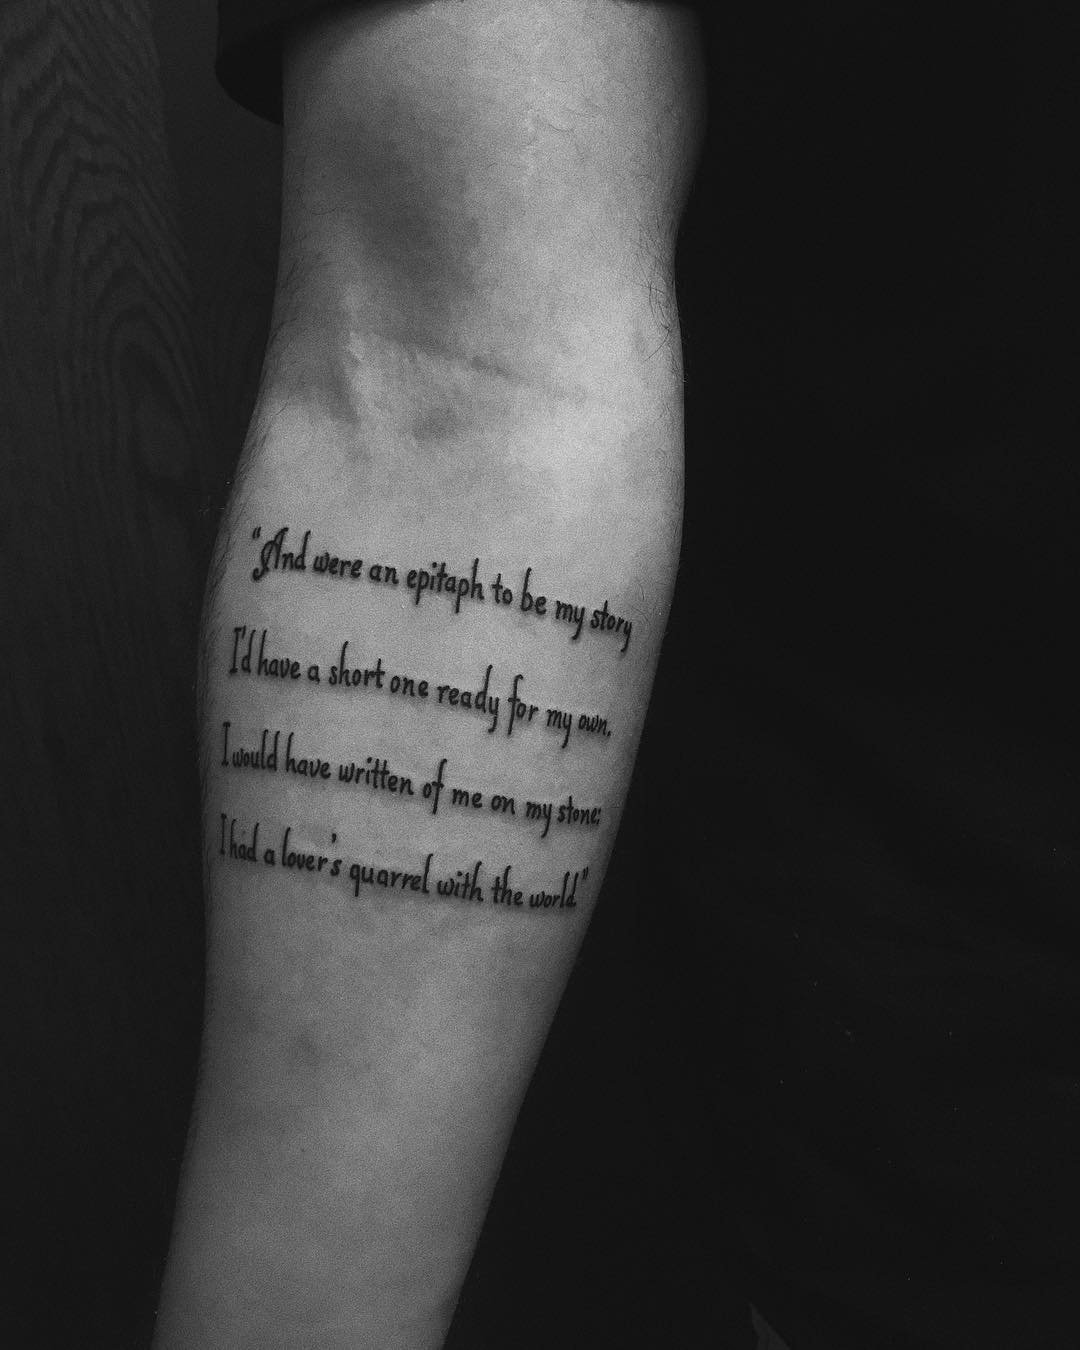 10 Poetry Tattoo Ideas: Words That Will Stay With You Forever - Read Poetry